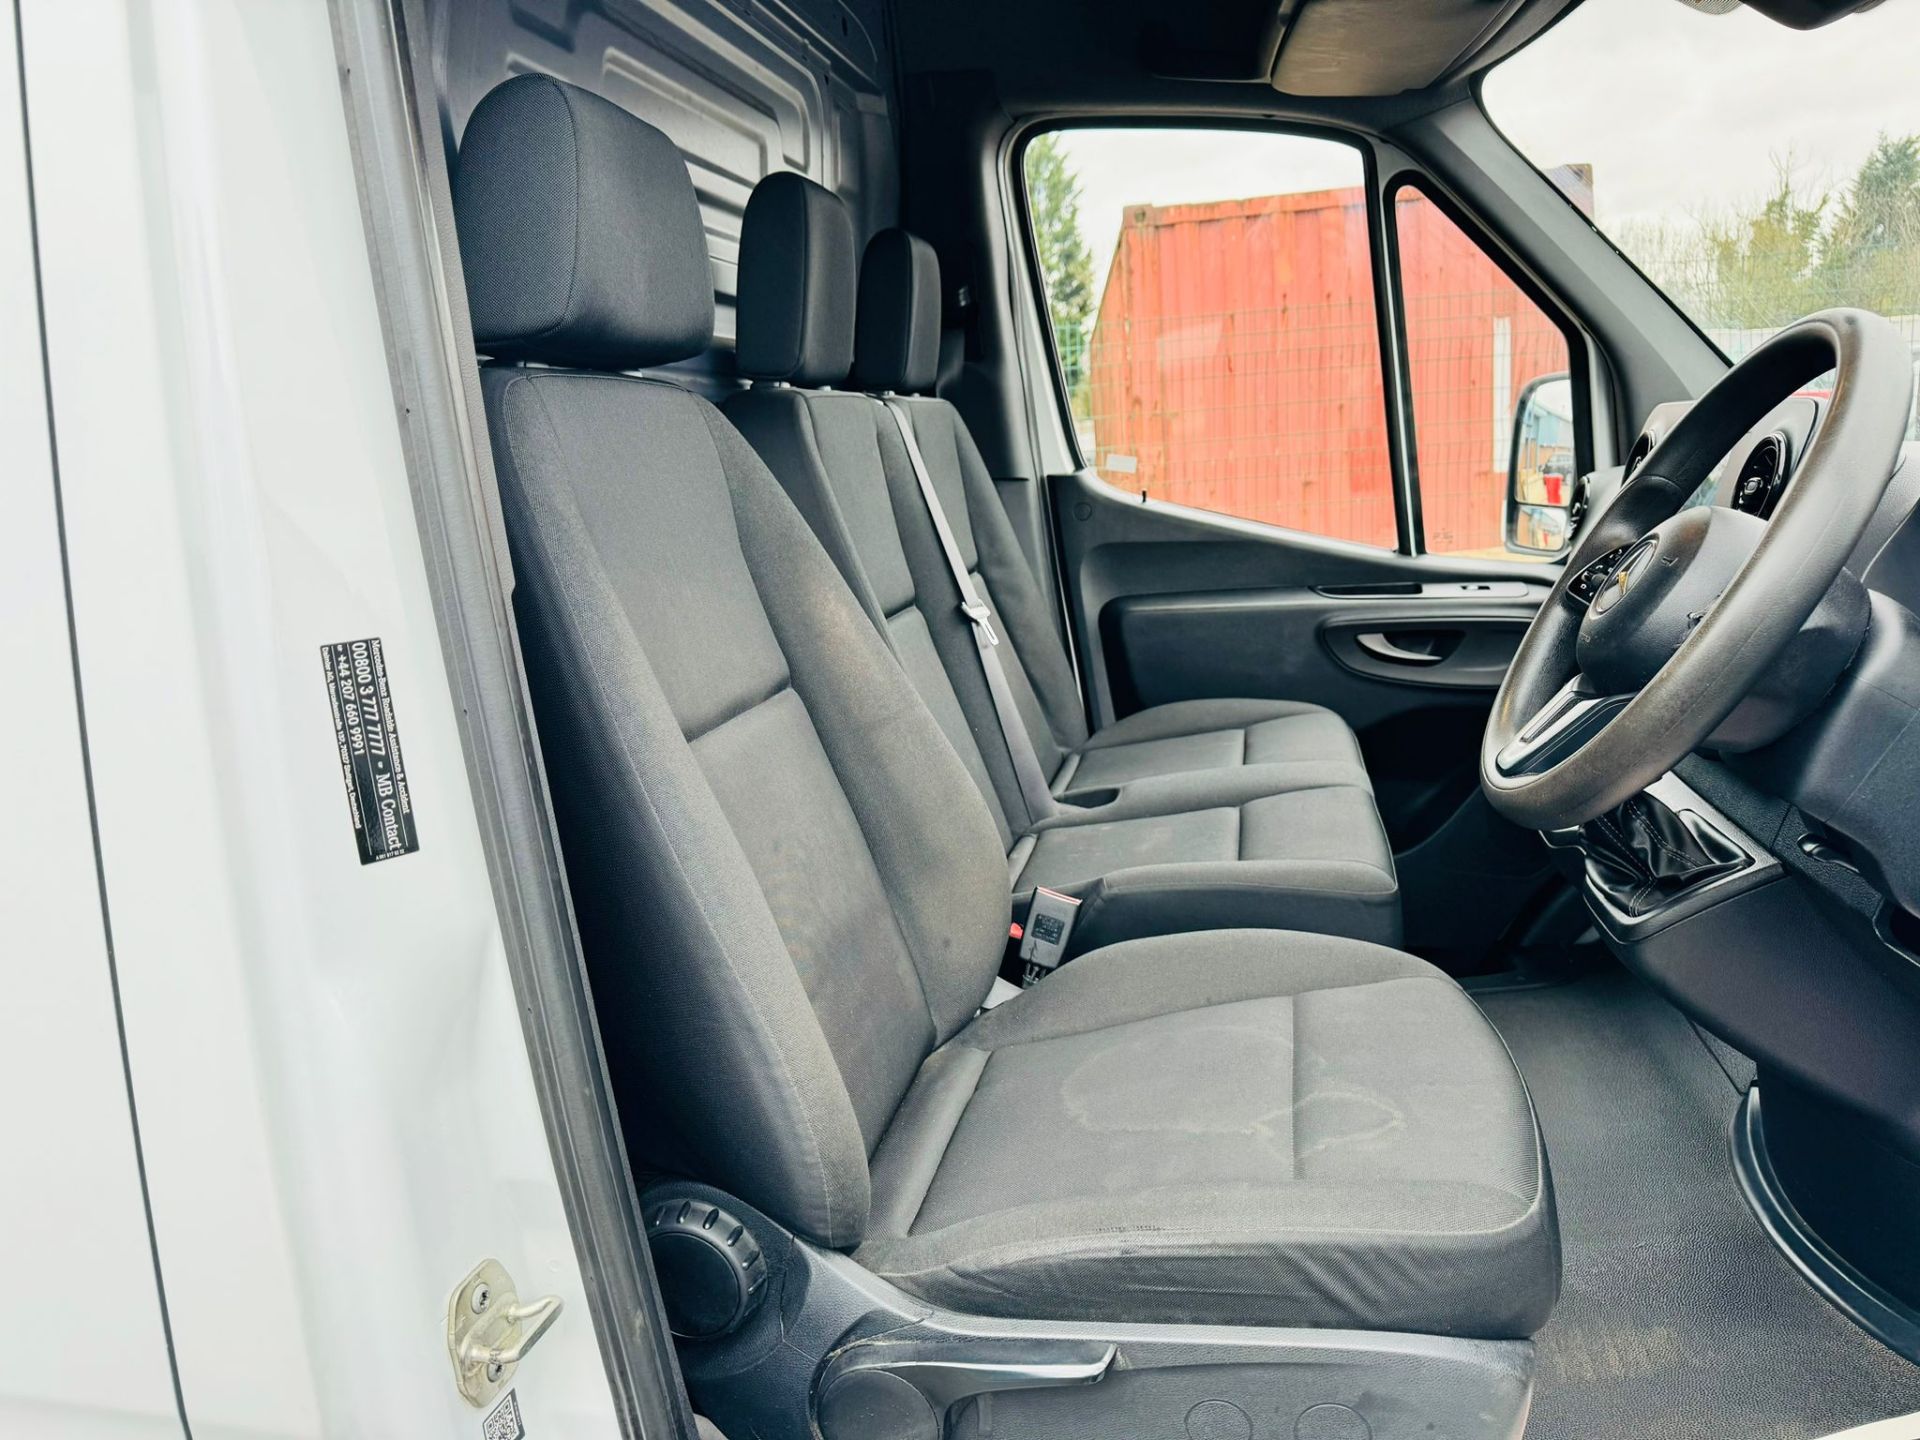 MERCEDES SPRINTER 314CDI MWB HI ROOF - 2019 19 Reg - 1 Owner From New - Euro 6 - NEW SHAPE!! - Image 4 of 8